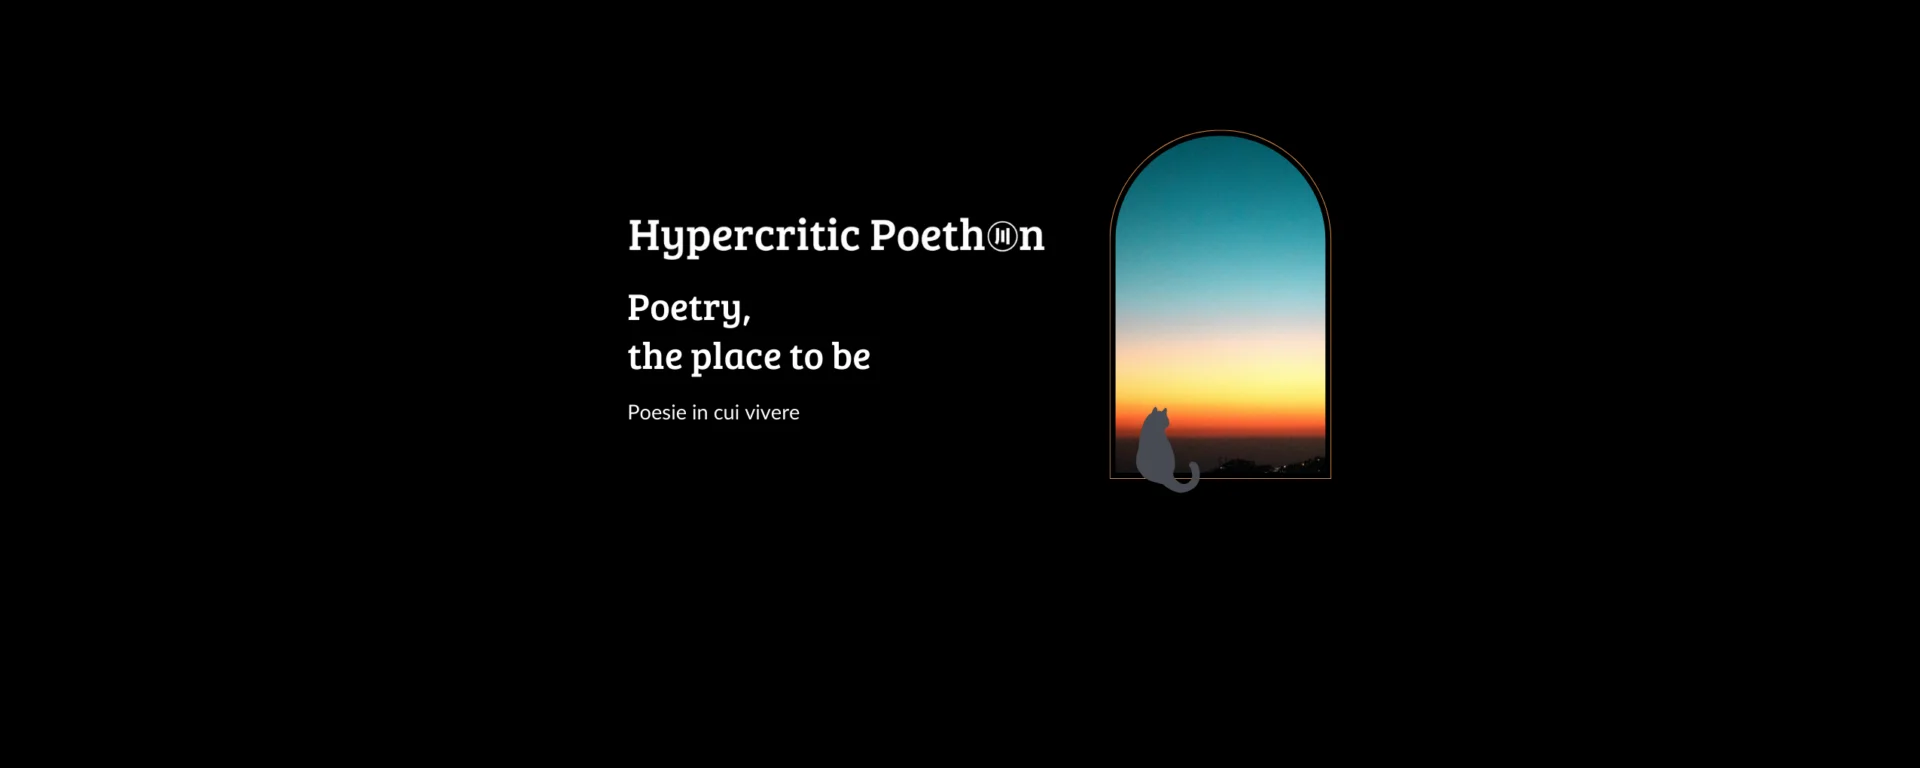 Hypercritic Poethon 2023 | Poetry, the place to be